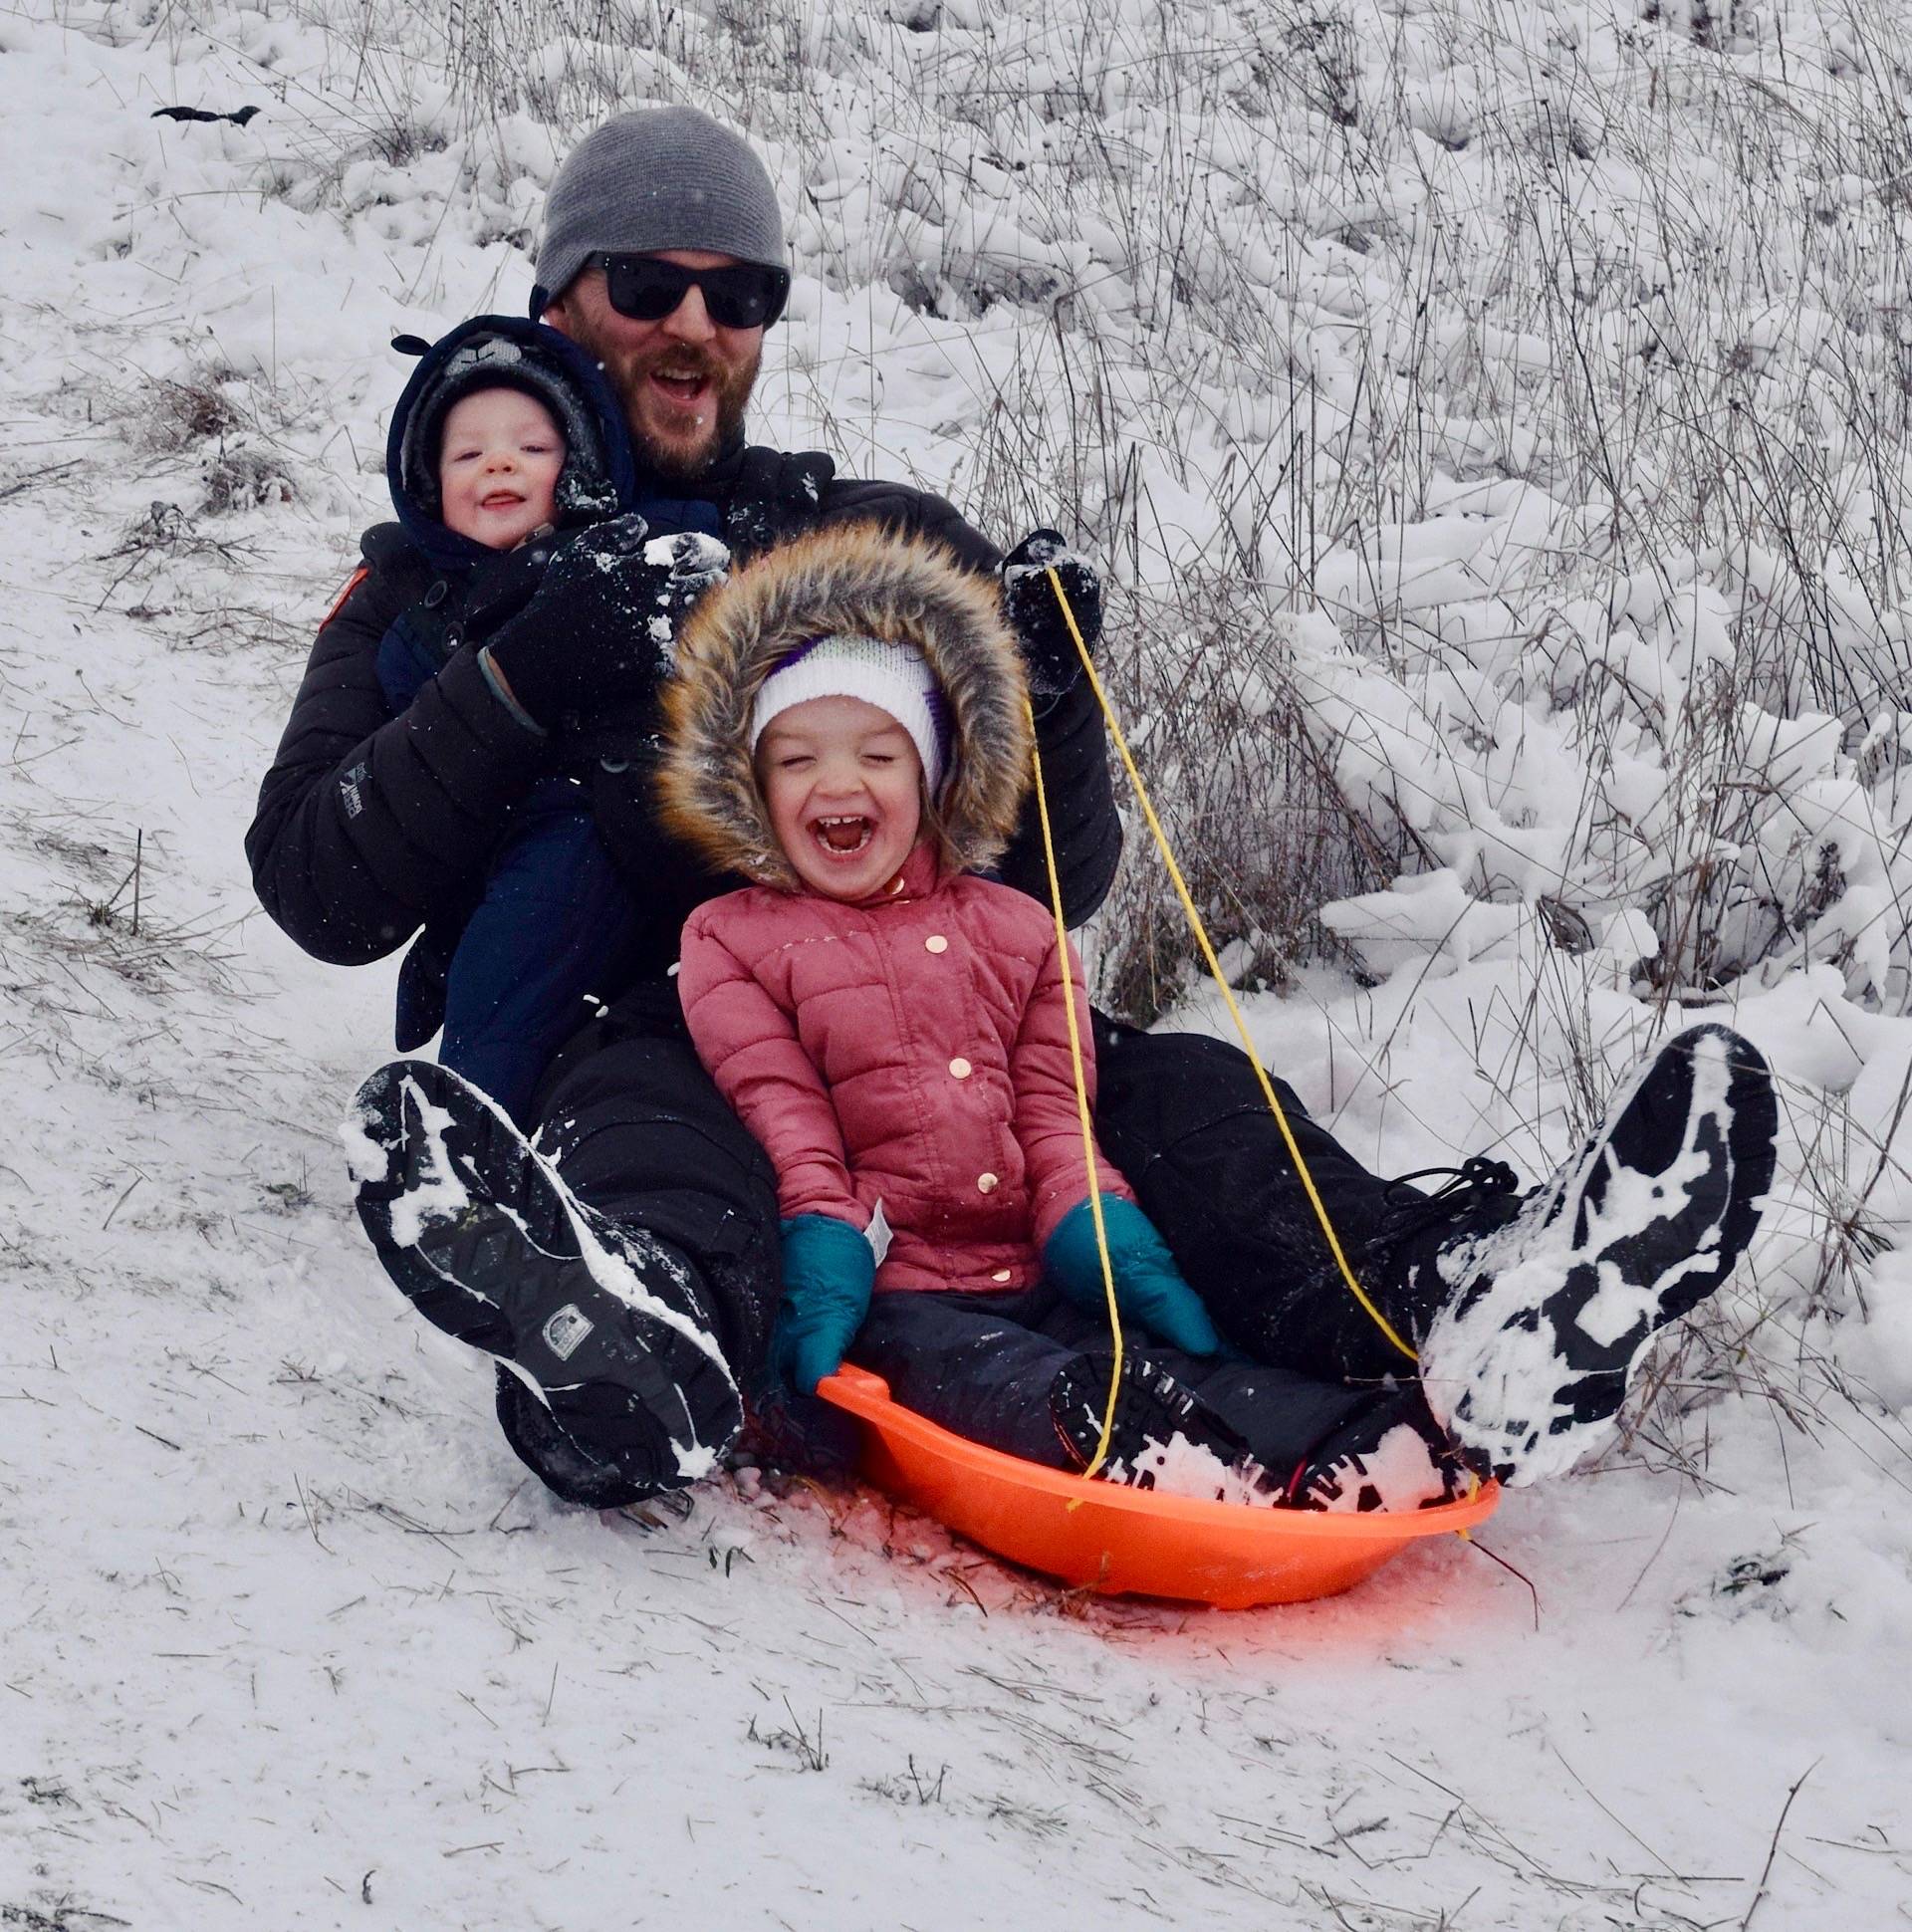 Steve Martin slides down a snow-caked hill in Auburn, with his kids Aevri, 3, and Eathan, 7 months, on Monday. A winter storm blasted Auburn and the greater valley overnight, closing schools, roads and canceling activities. The freeze canceled classes and impacted those working Monday and Tuesday. Schools reopened Wednesday. RACHEL CIAMPI, Auburn Reporter